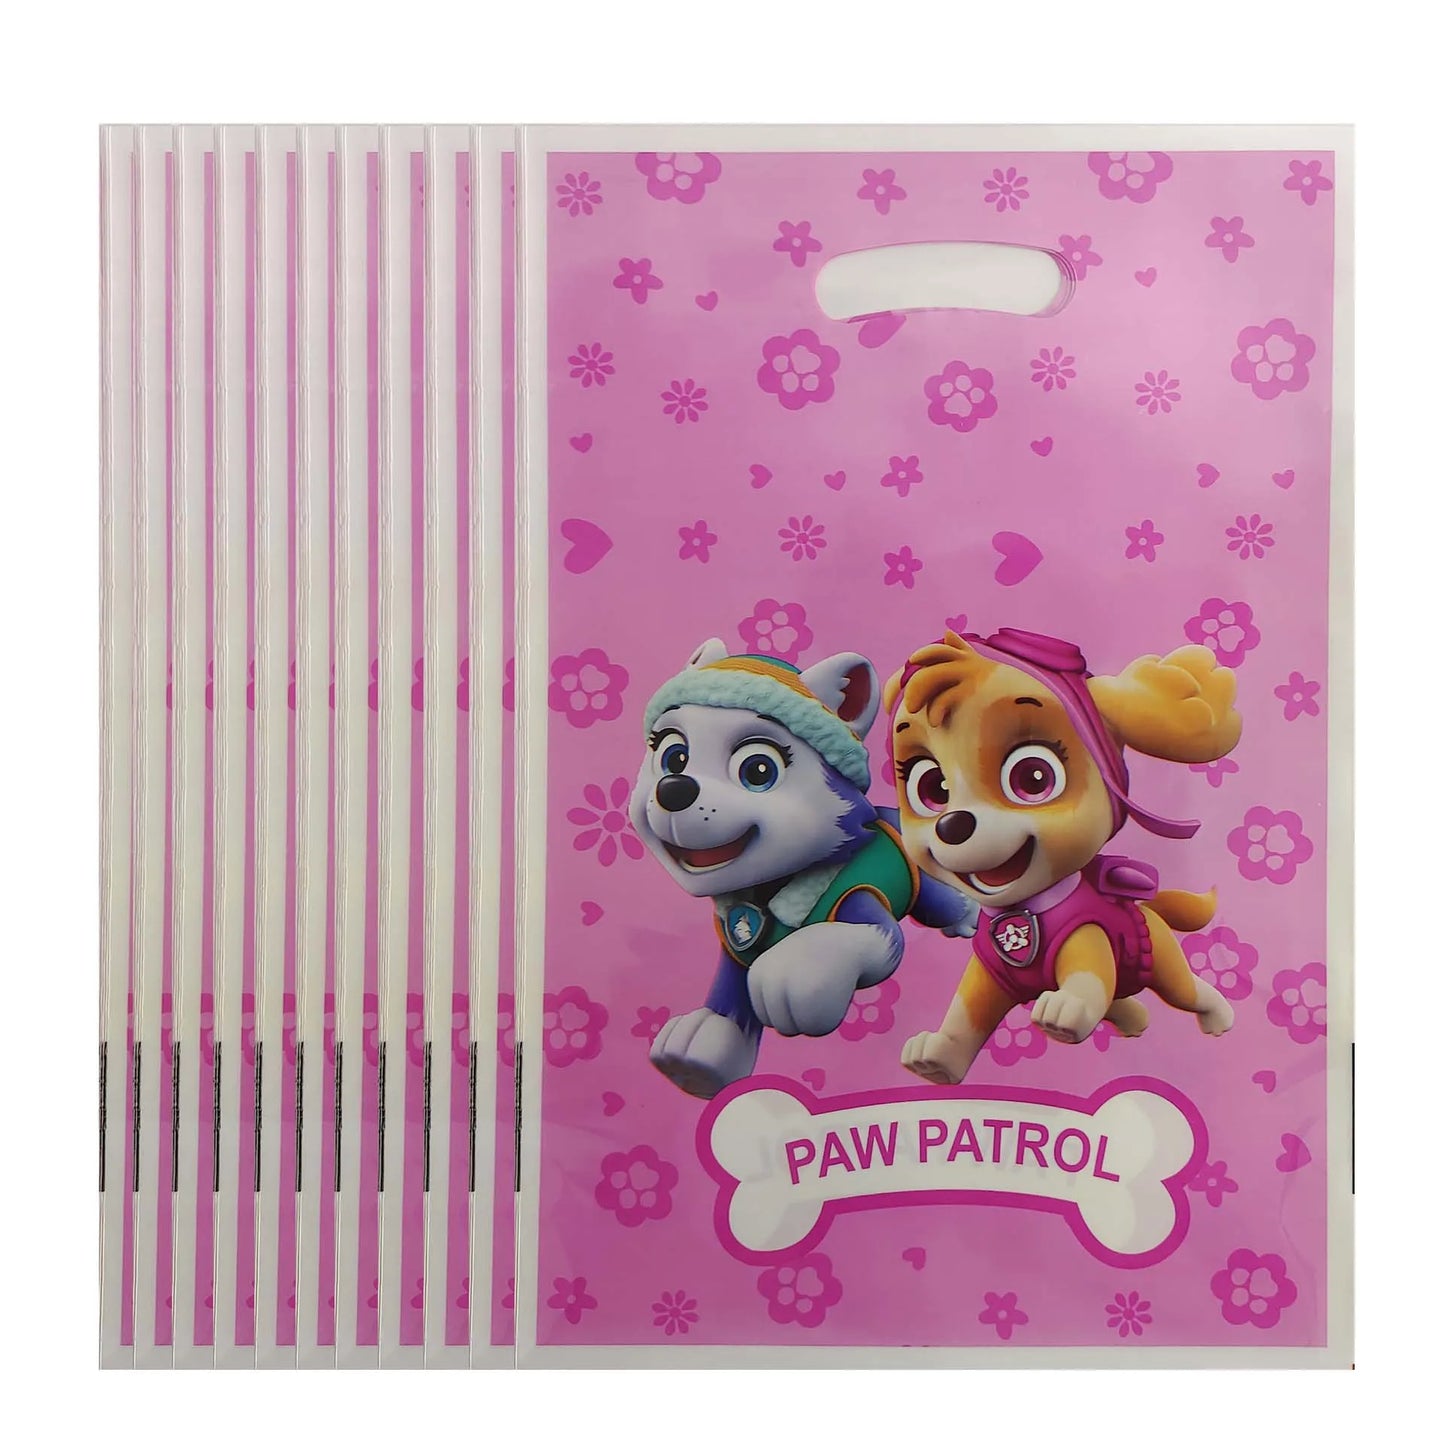 Paw Patrol Pink Birthday Skye Theme Party Decorations - Tableware Set Paper Plates Cups Napkins - For Kid Party Supplies Toy Gifts-10pcs Gift Bags-Other-